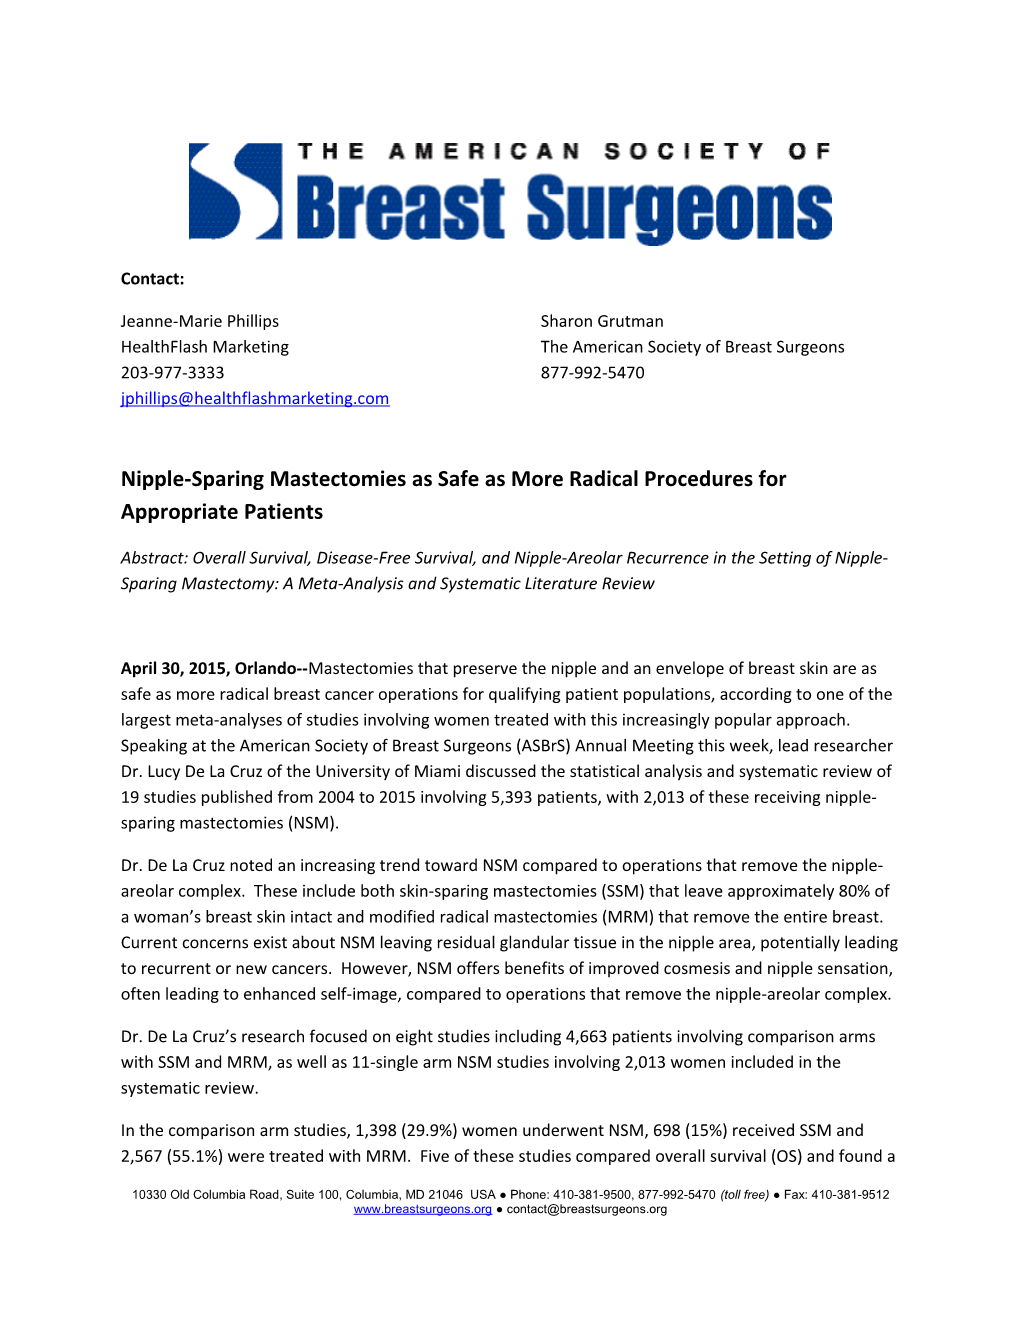 Nipple-Sparing Mastectomies As Safe As More Radical Procedures for Appropriate Patients